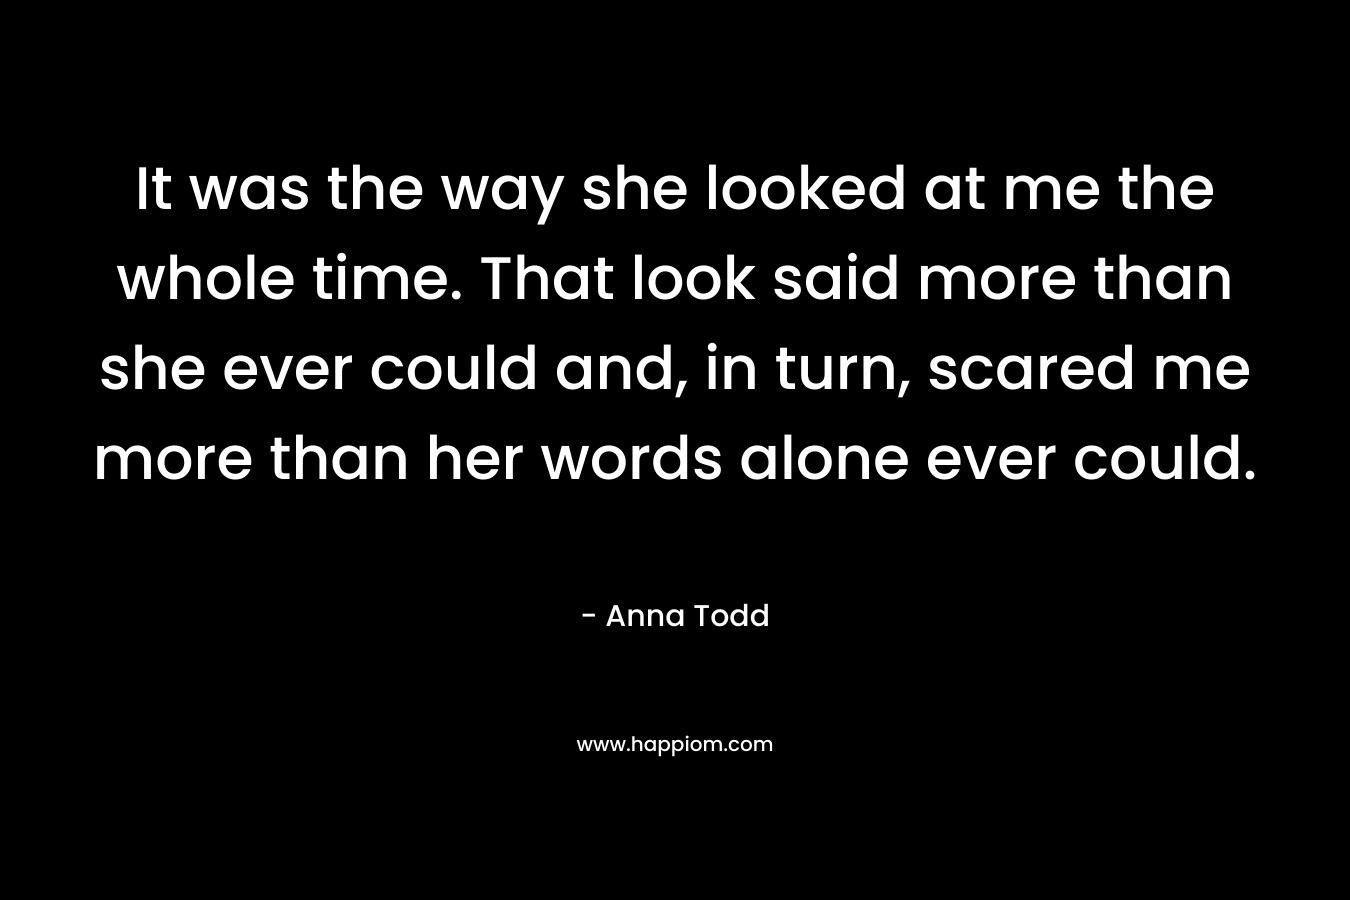 It was the way she looked at me the whole time. That look said more than she ever could and, in turn, scared me more than her words alone ever could. – Anna Todd